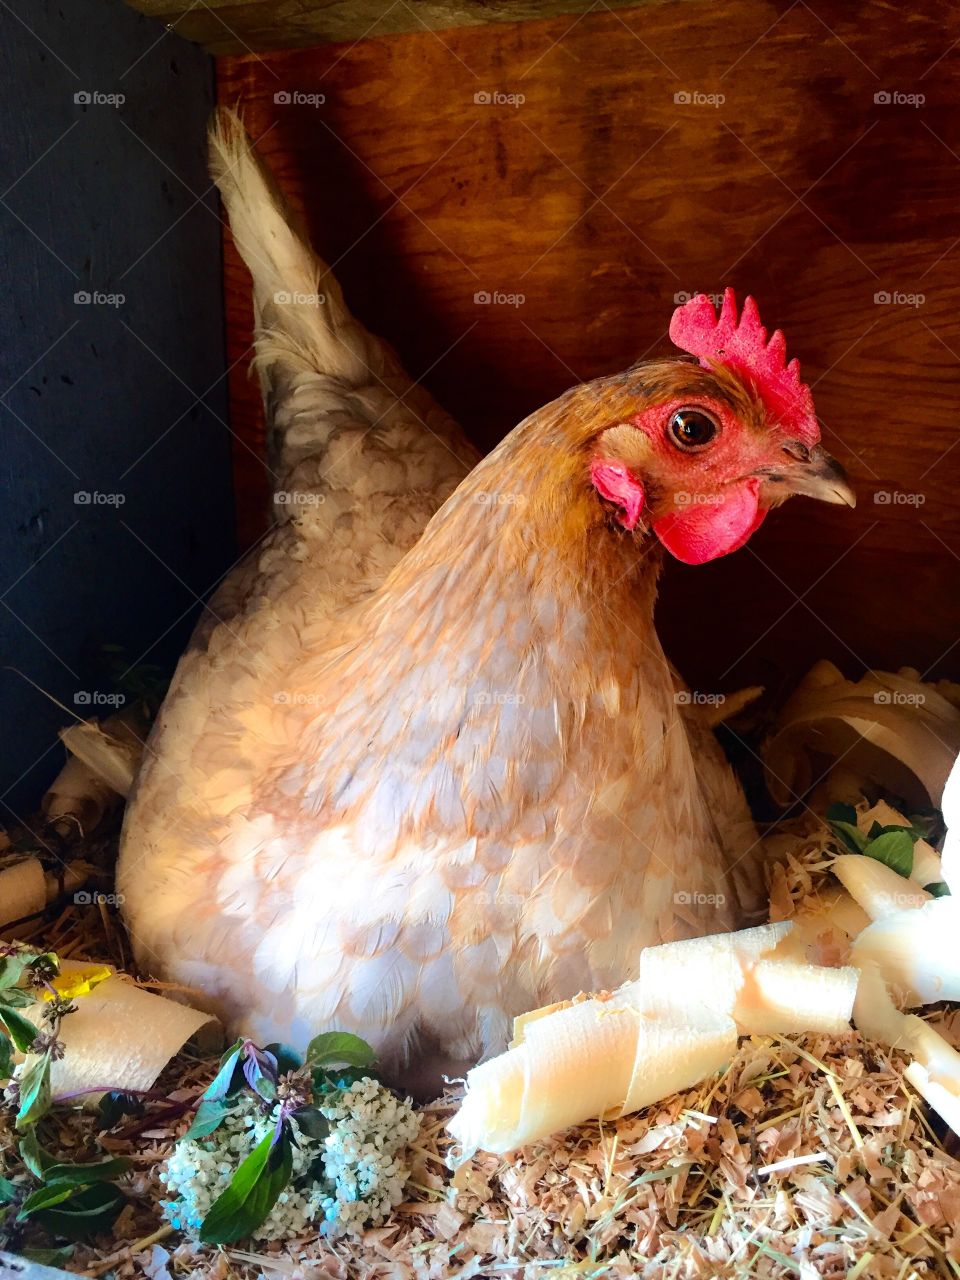 A nesting mother hen on her clutch of eggs. Enjoying her fresh pine shavings, fresh mint and yarrow herbs. 